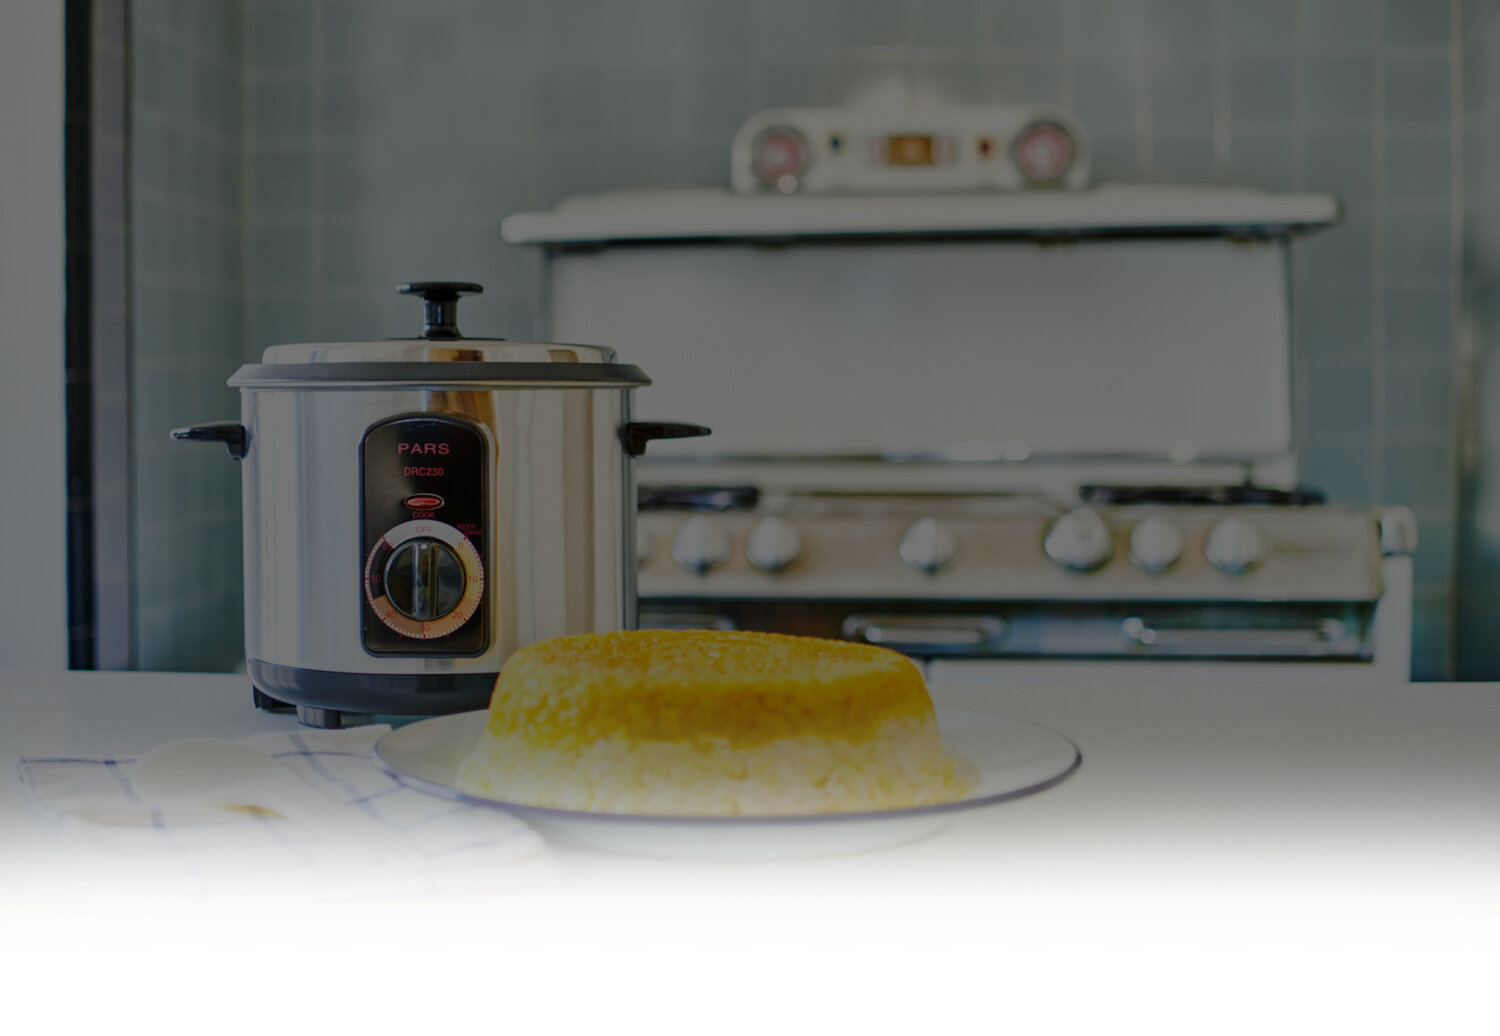  Pars Automatic Persian Rice Cooker - Tahdig Rice Maker